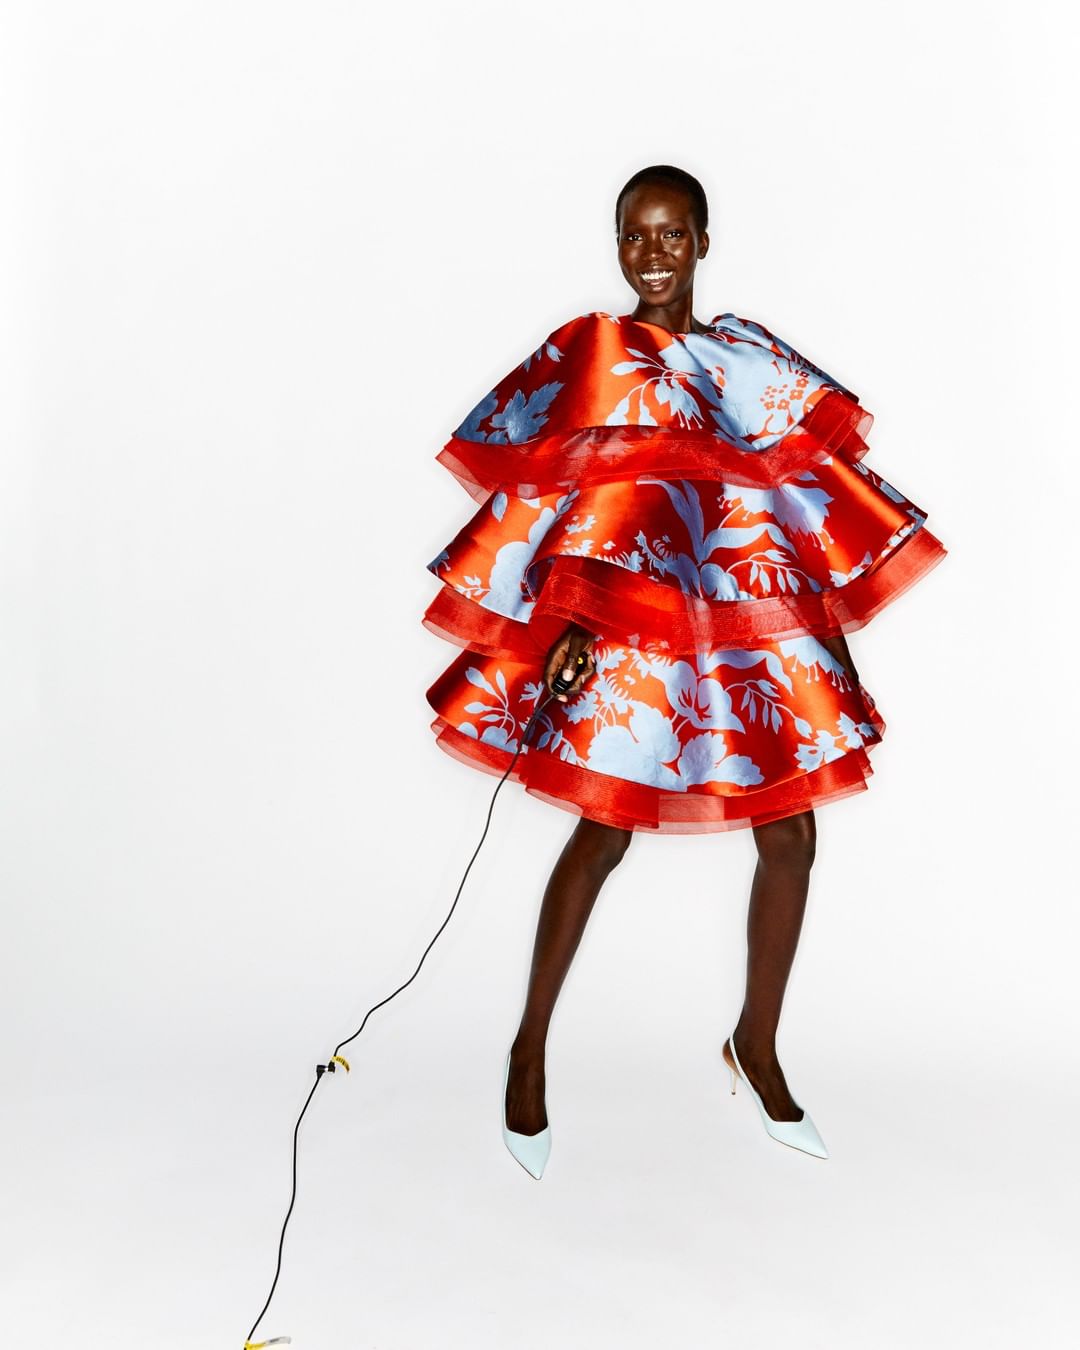 CAROLINA HERRERA - Smile, you're on camera! Create a portrait of perfection with ravishing billows of pattern and vibrant hues from the Fall 2020 collection by Creative Director @wesgordon. Shot by @p...